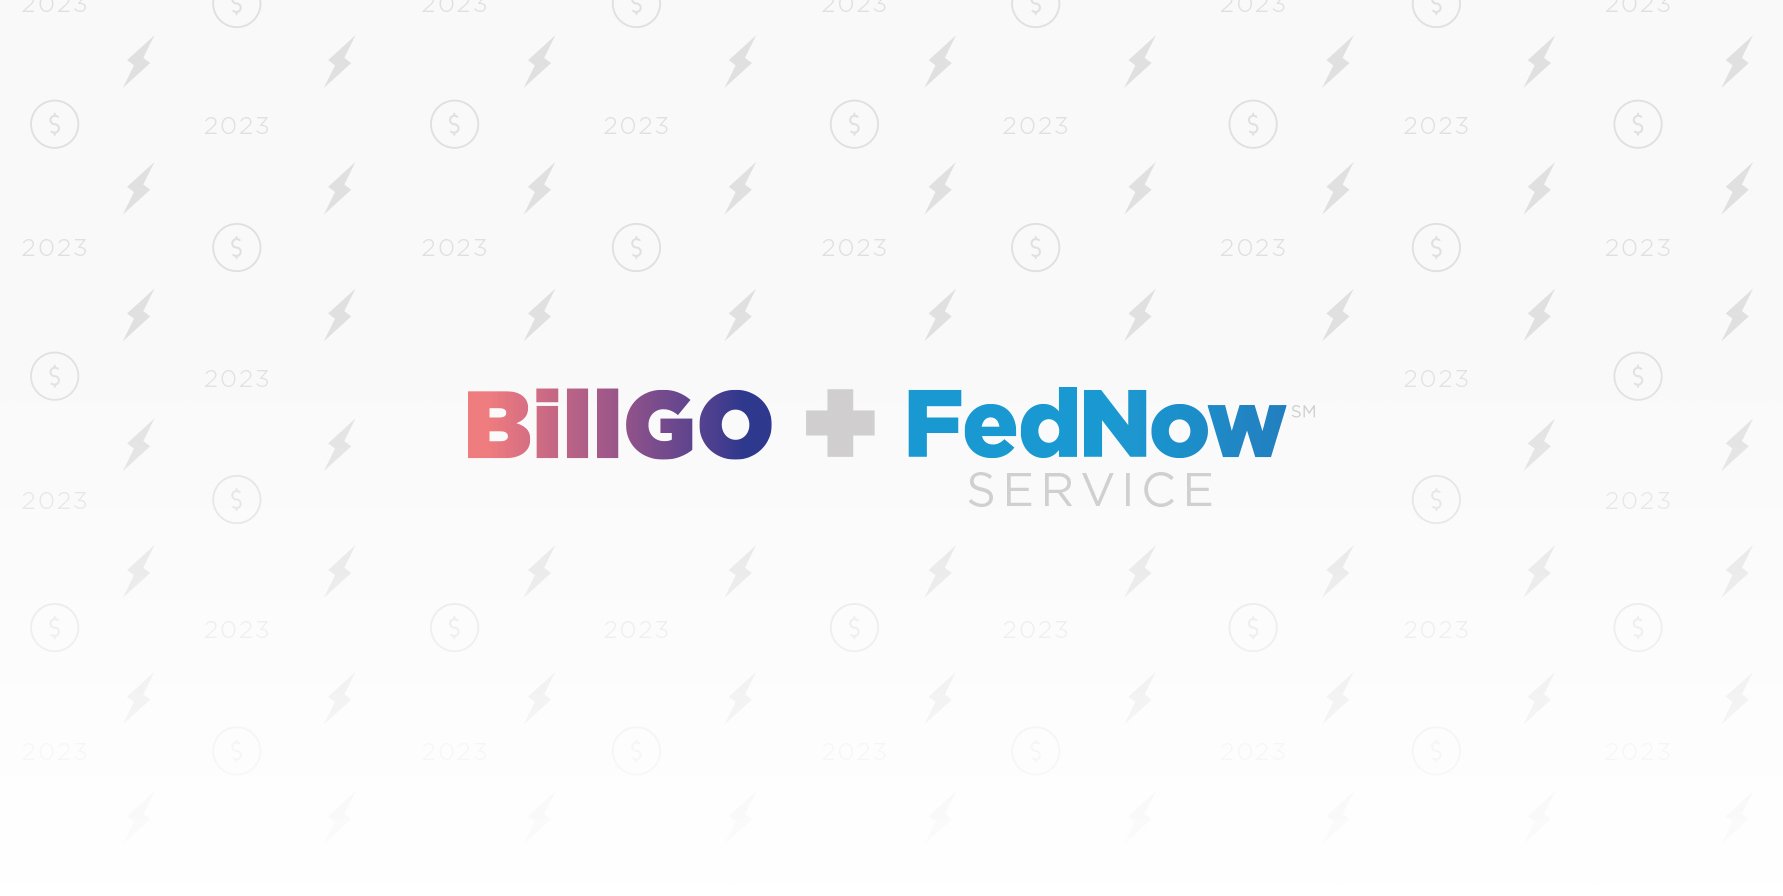 BillGO Will Be Part of the FedNow Service